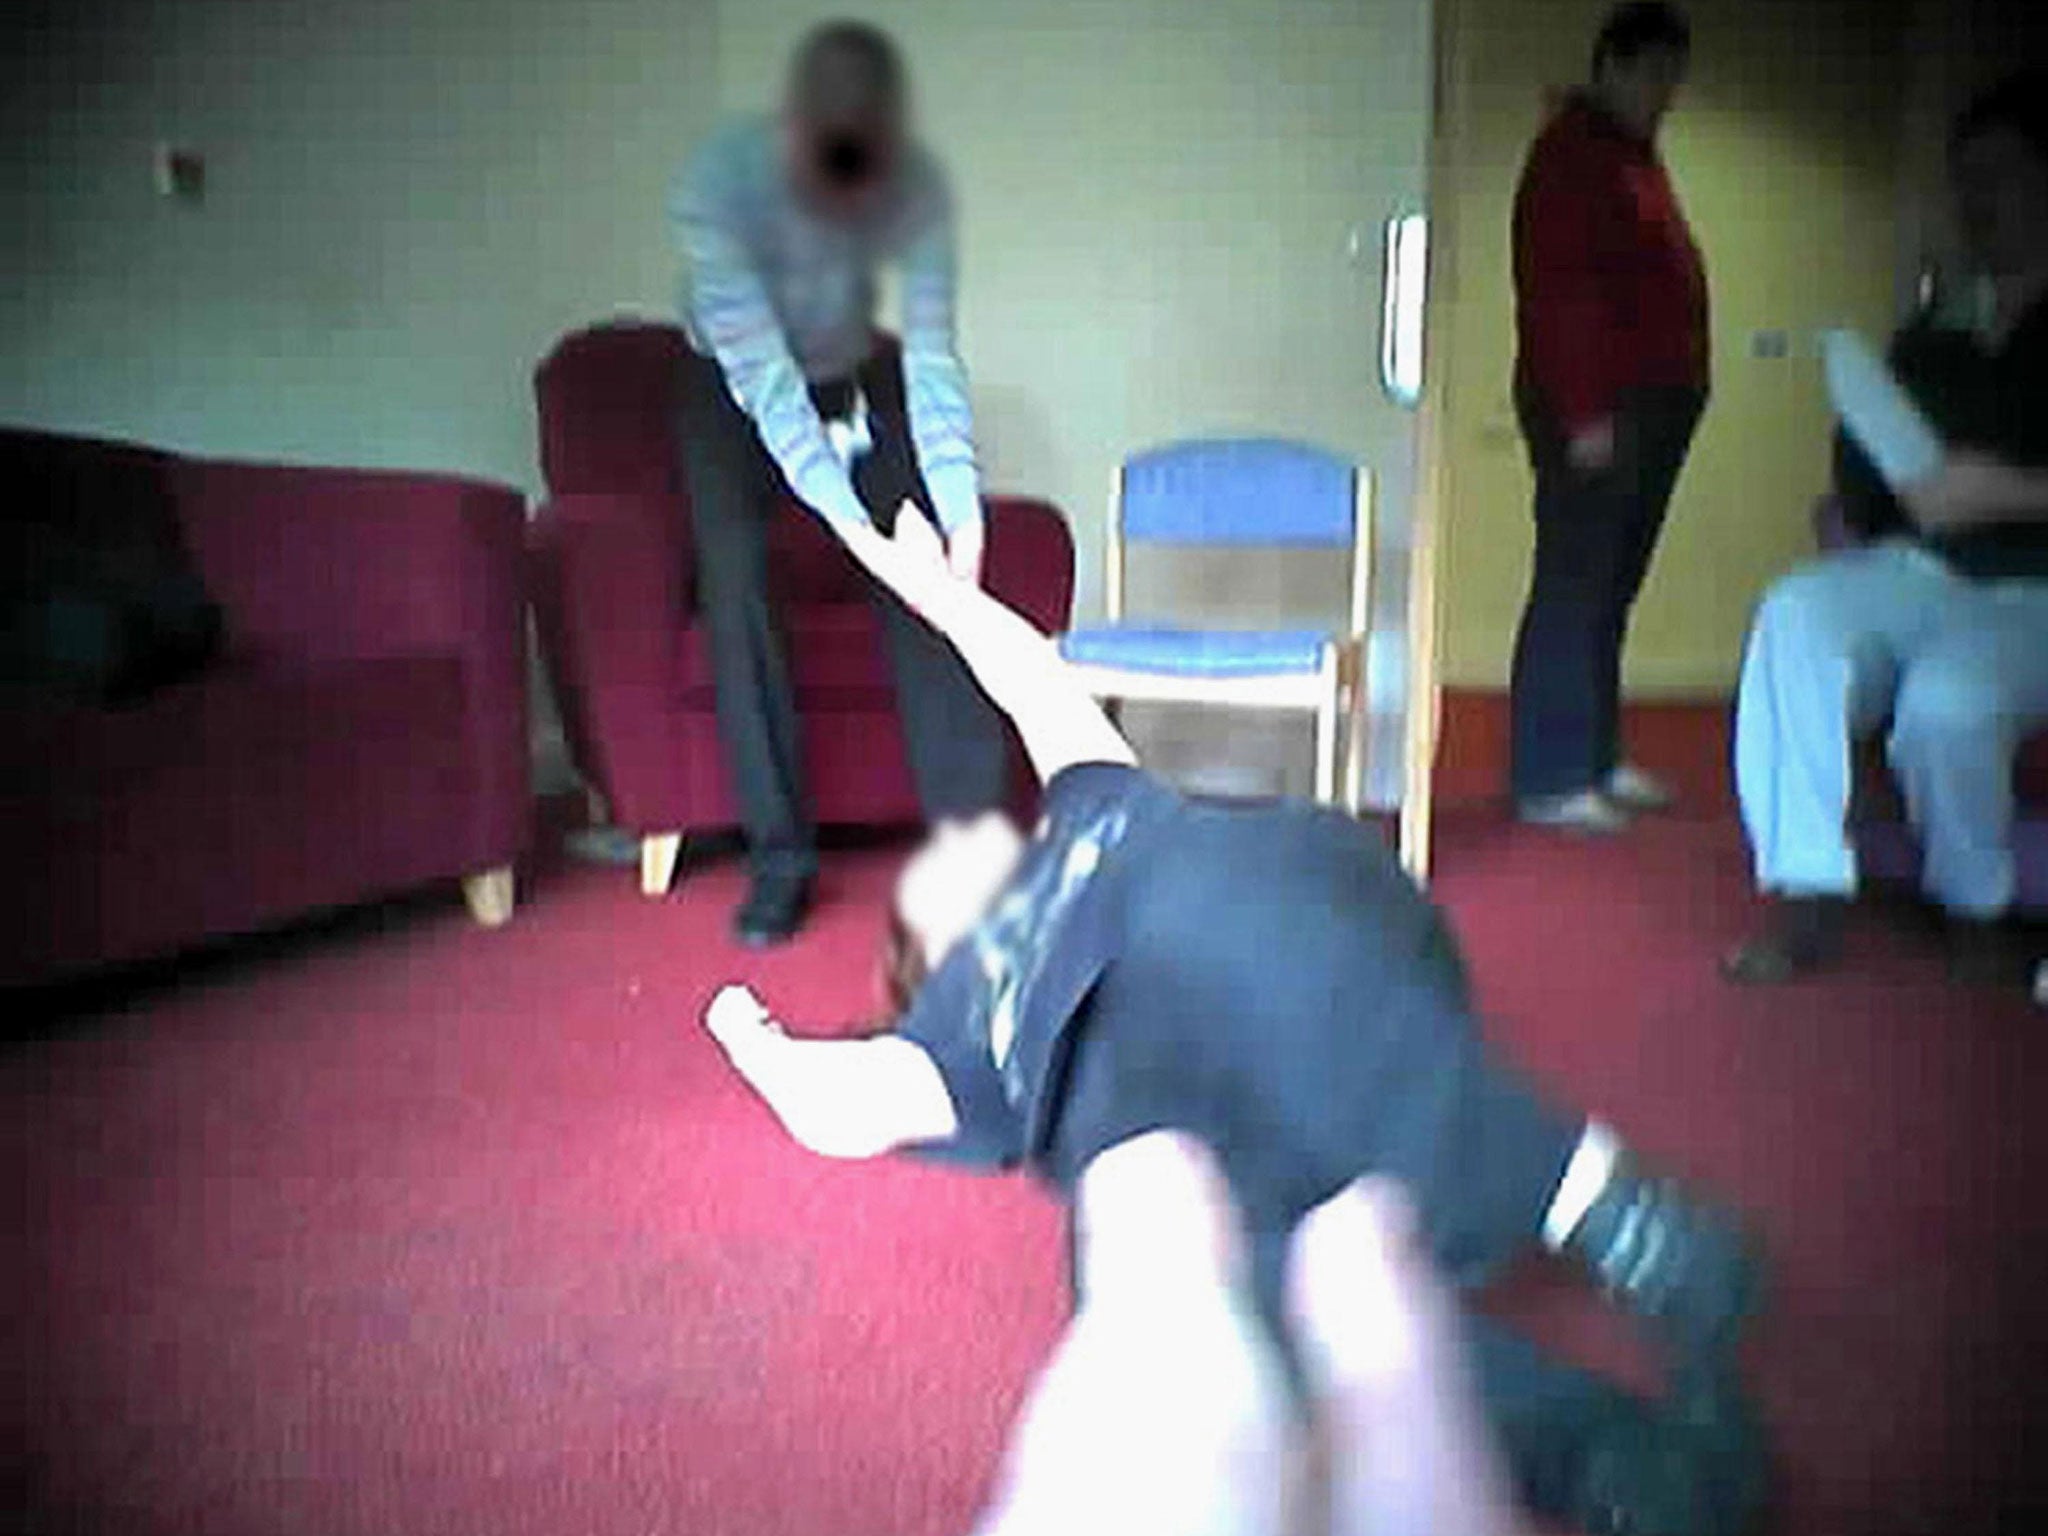 BBC’s Panorama programme exposed abuses at Winterbourne View care home